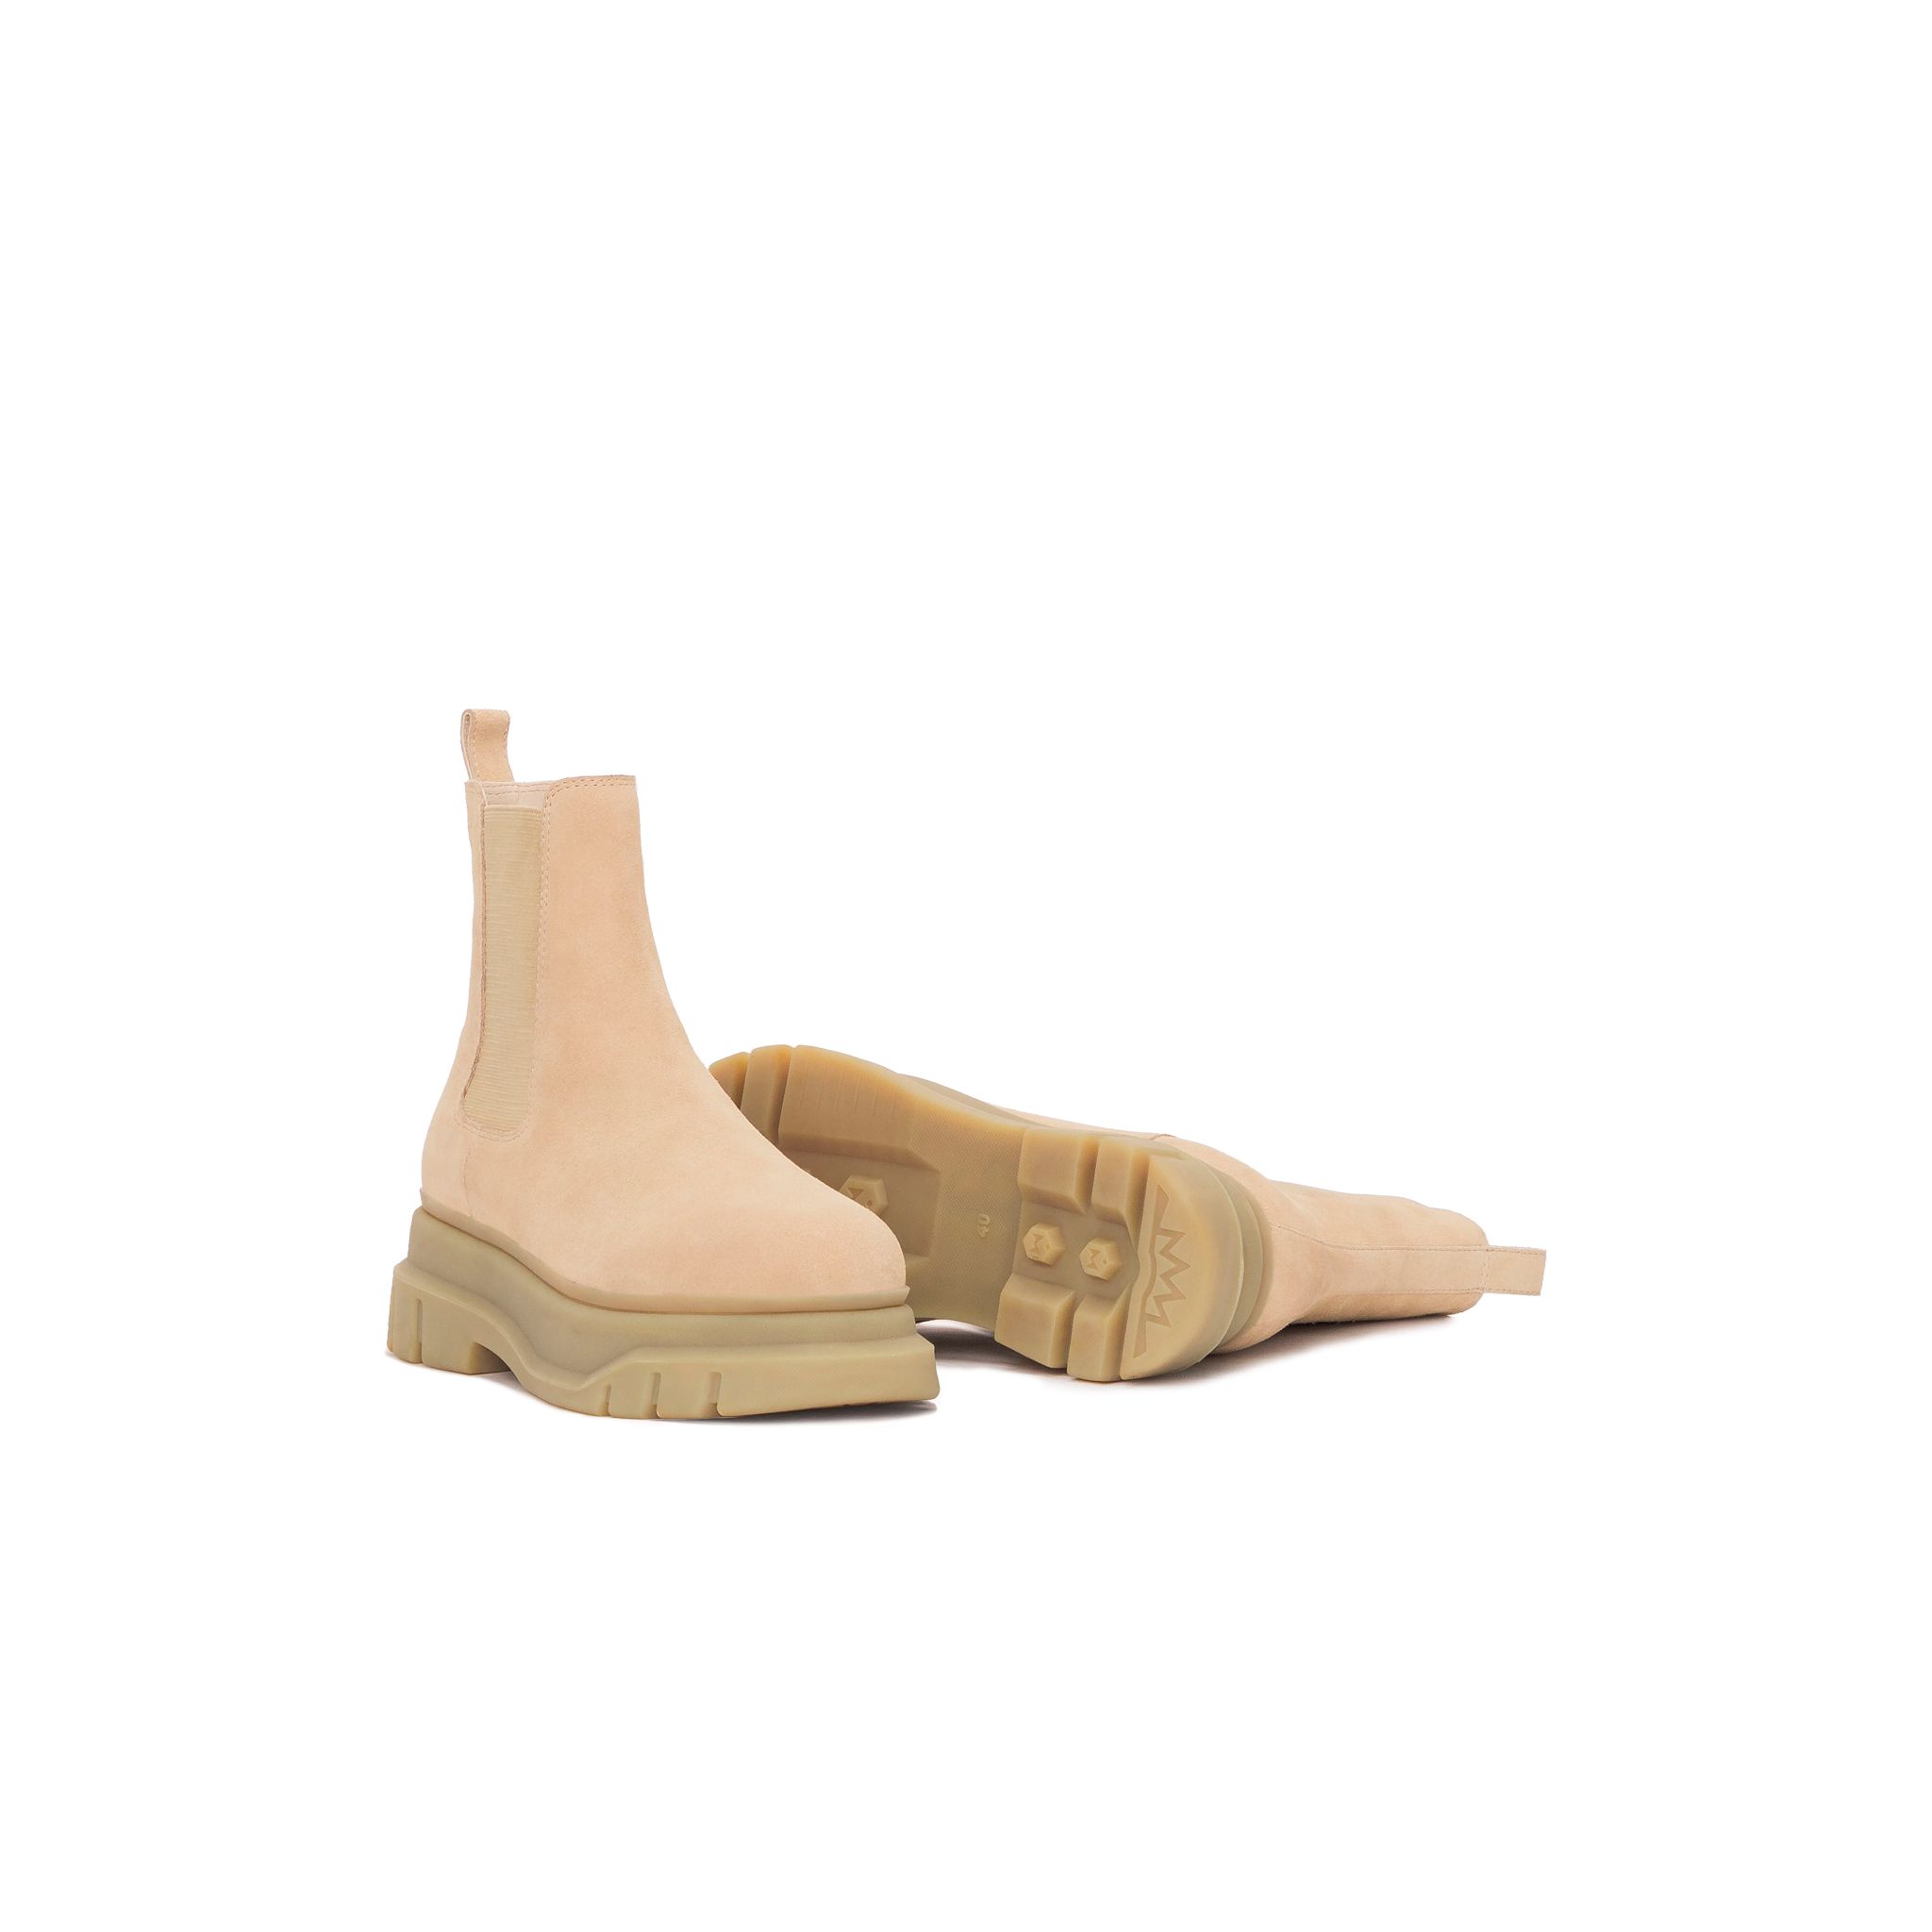  THE MARS LADY WOLF CHELSEA BOOT - TAN SUEDE 